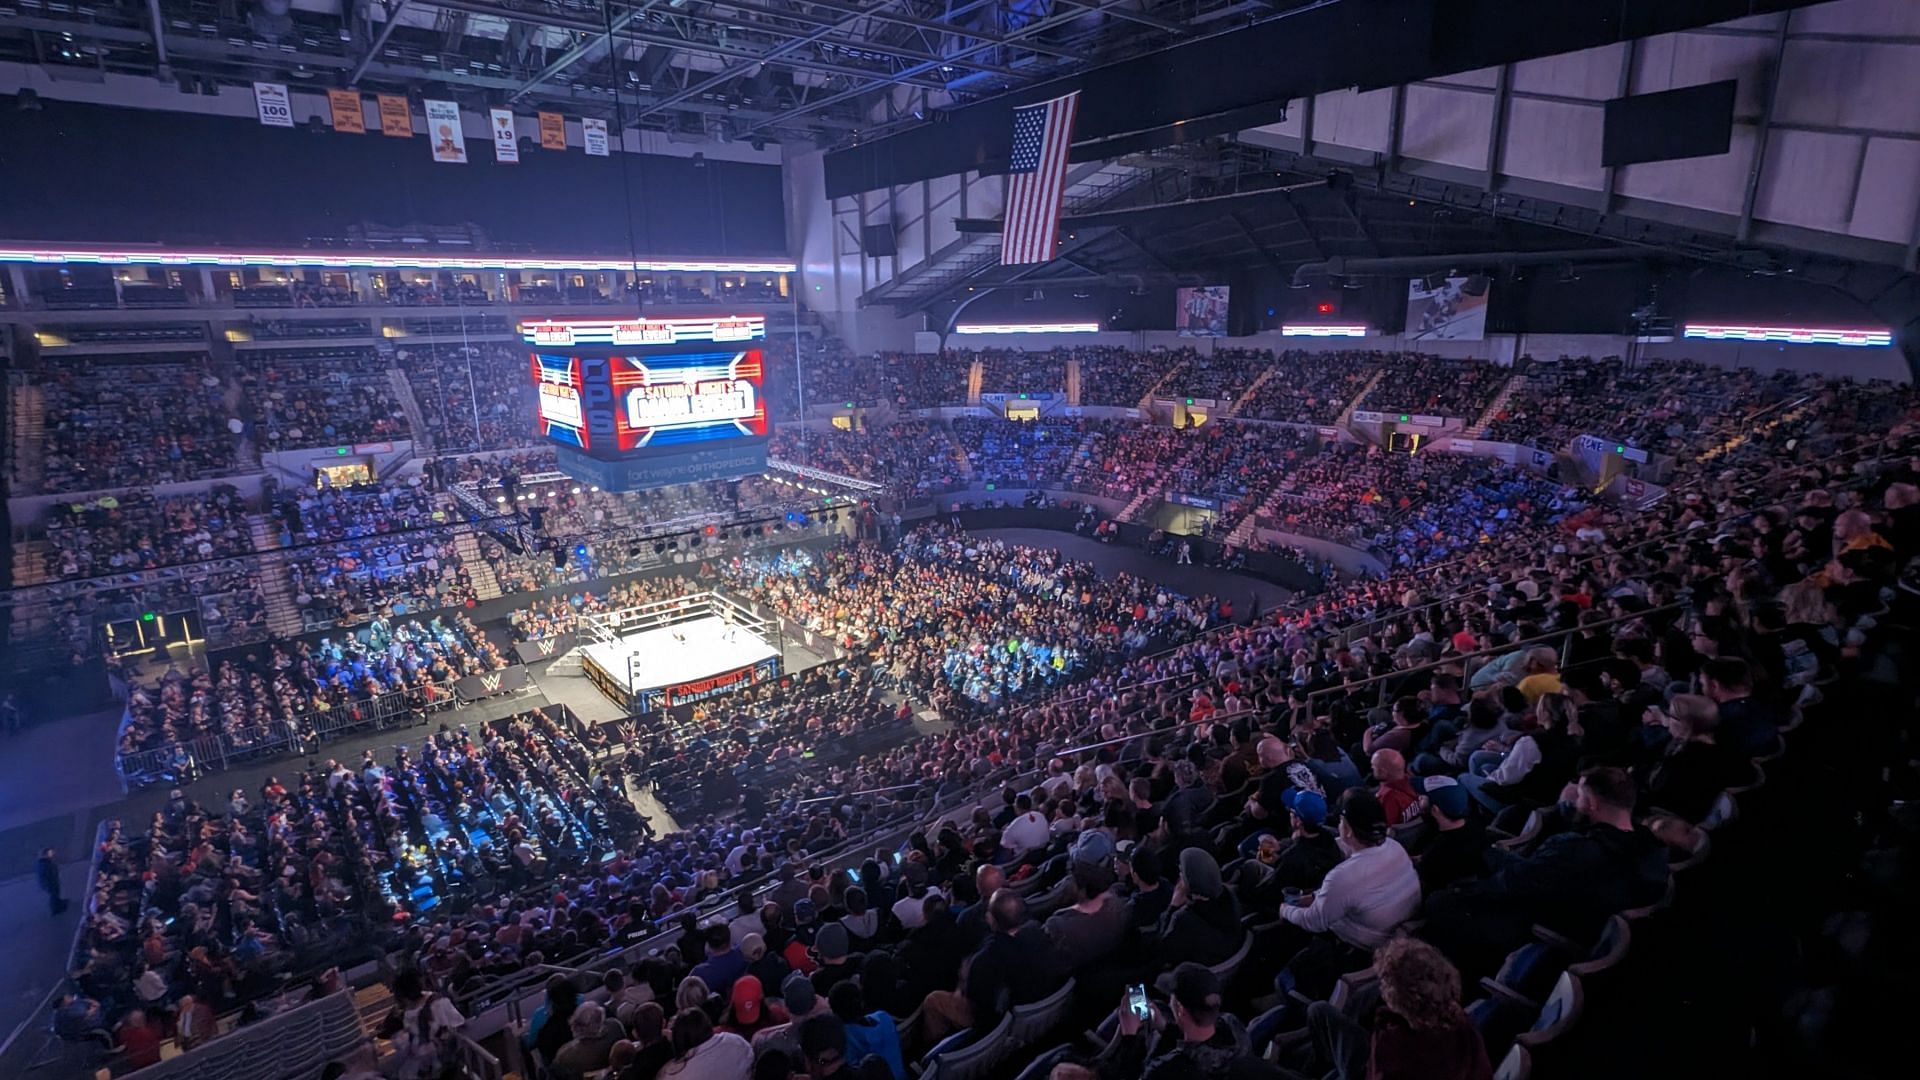 The WWE live event in Fort Wayne had some big matches.